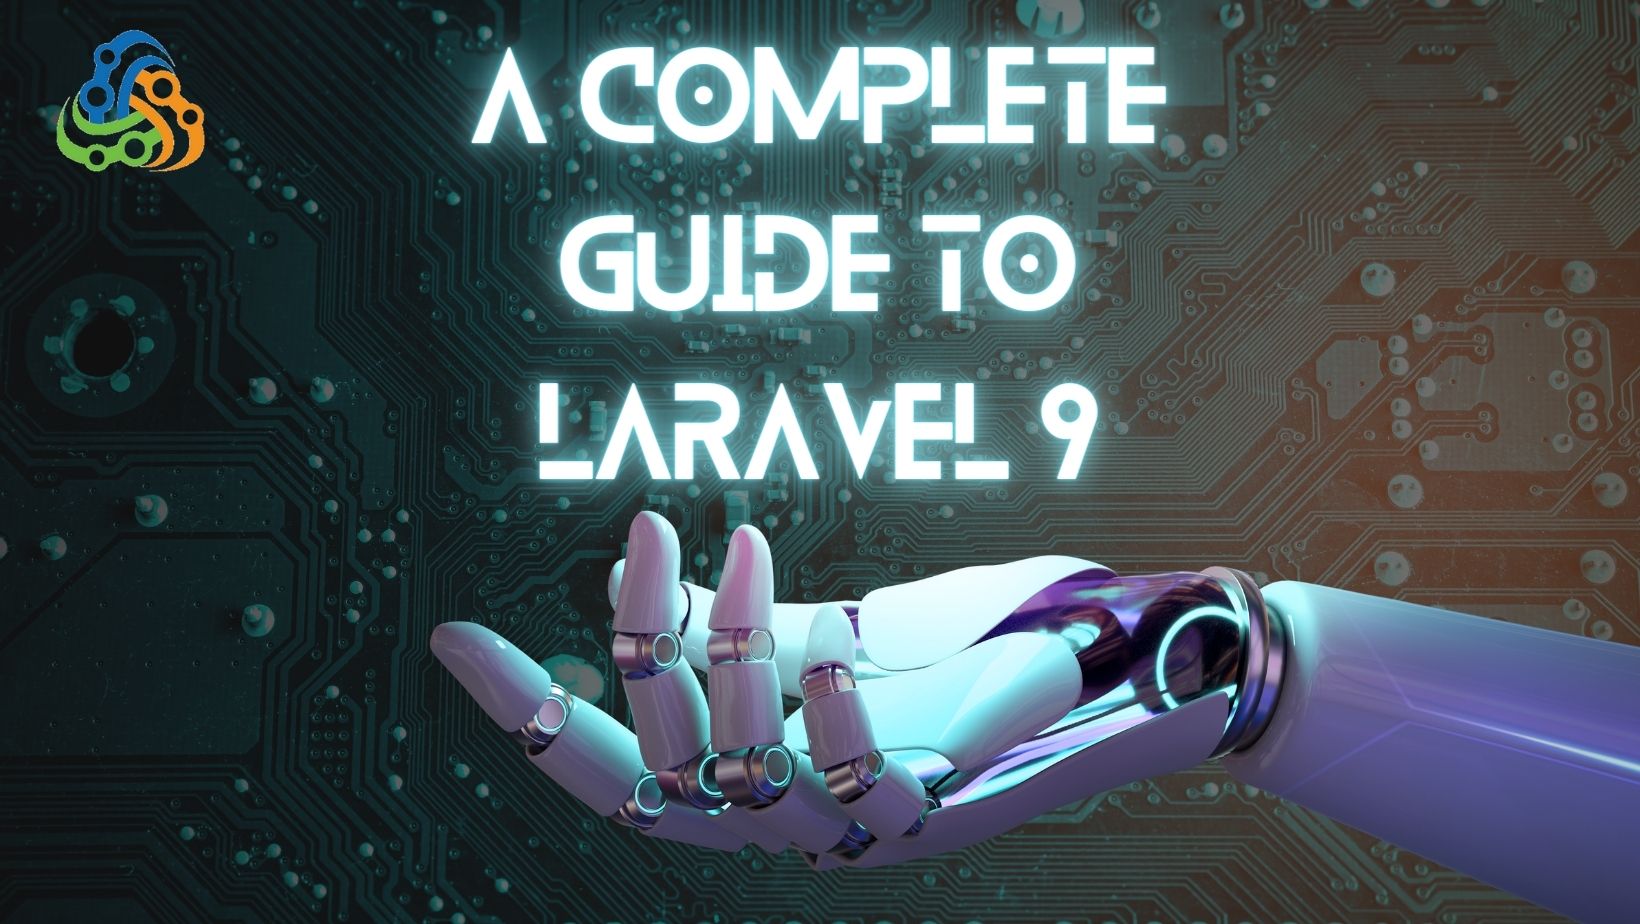 A Complete Guide to Laravel 9